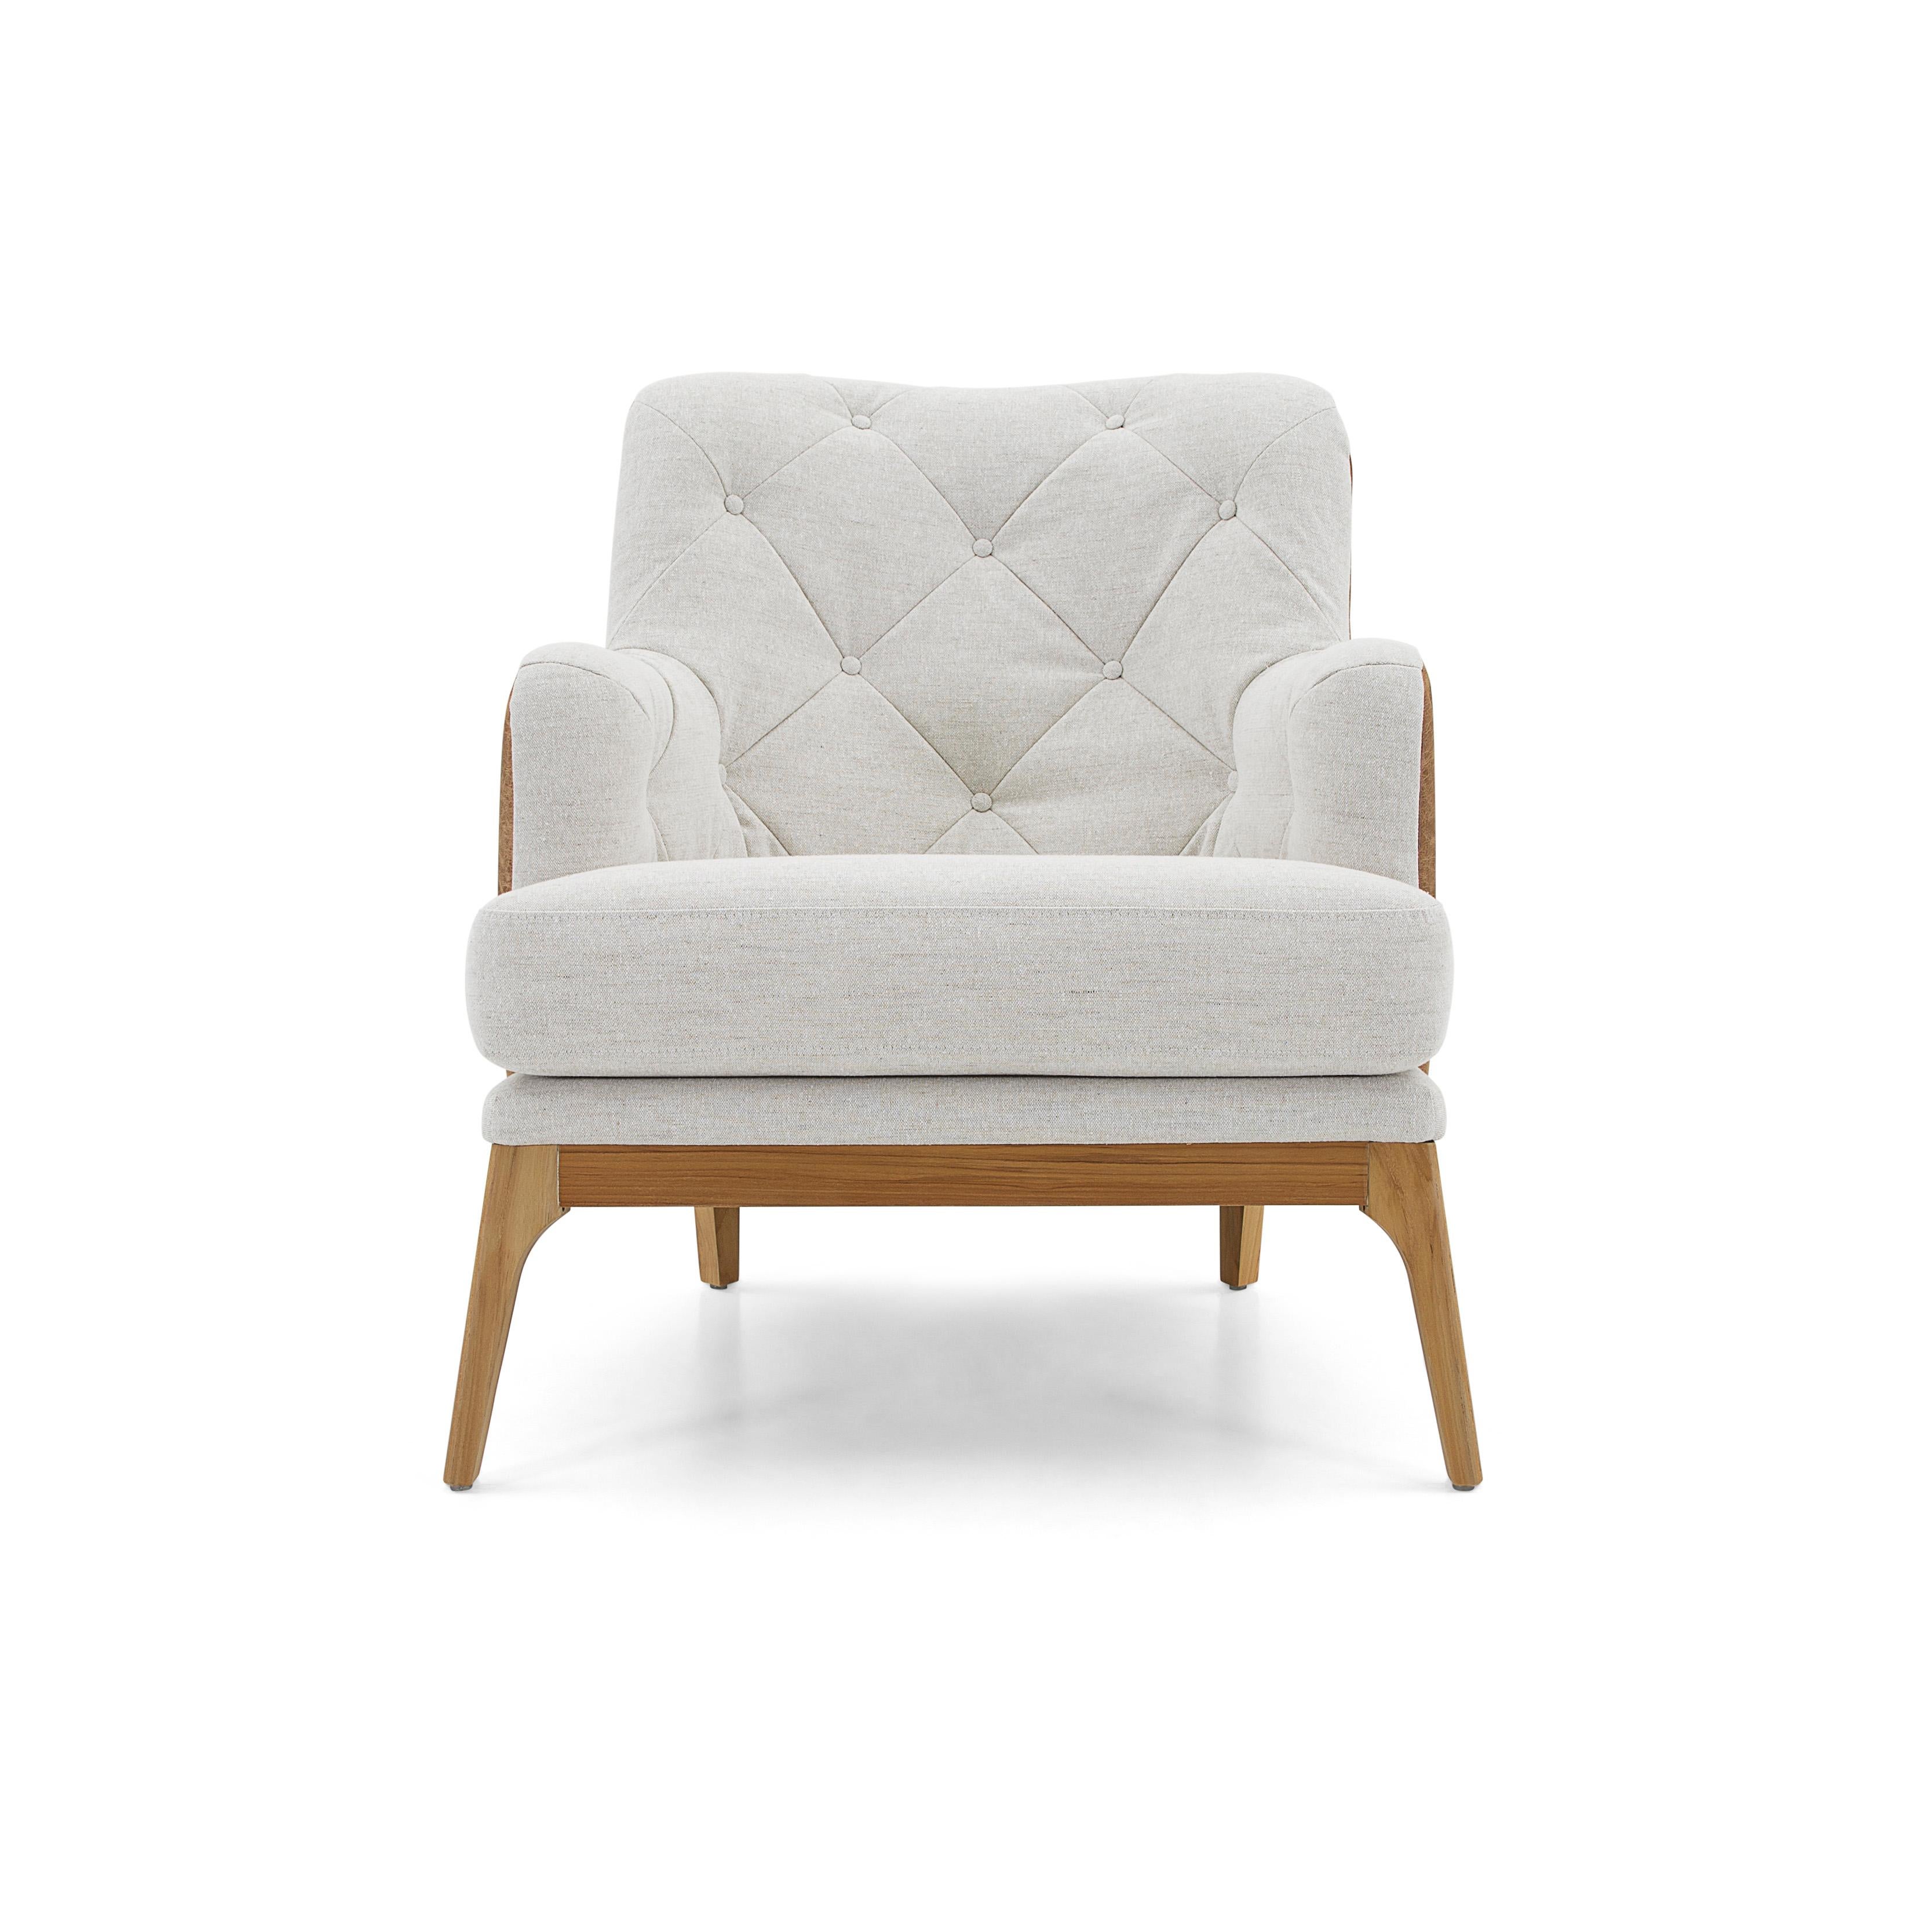 Contemporary Athos Armchair Upholstered in Leather and Fabric in Teak Wood Finish For Sale